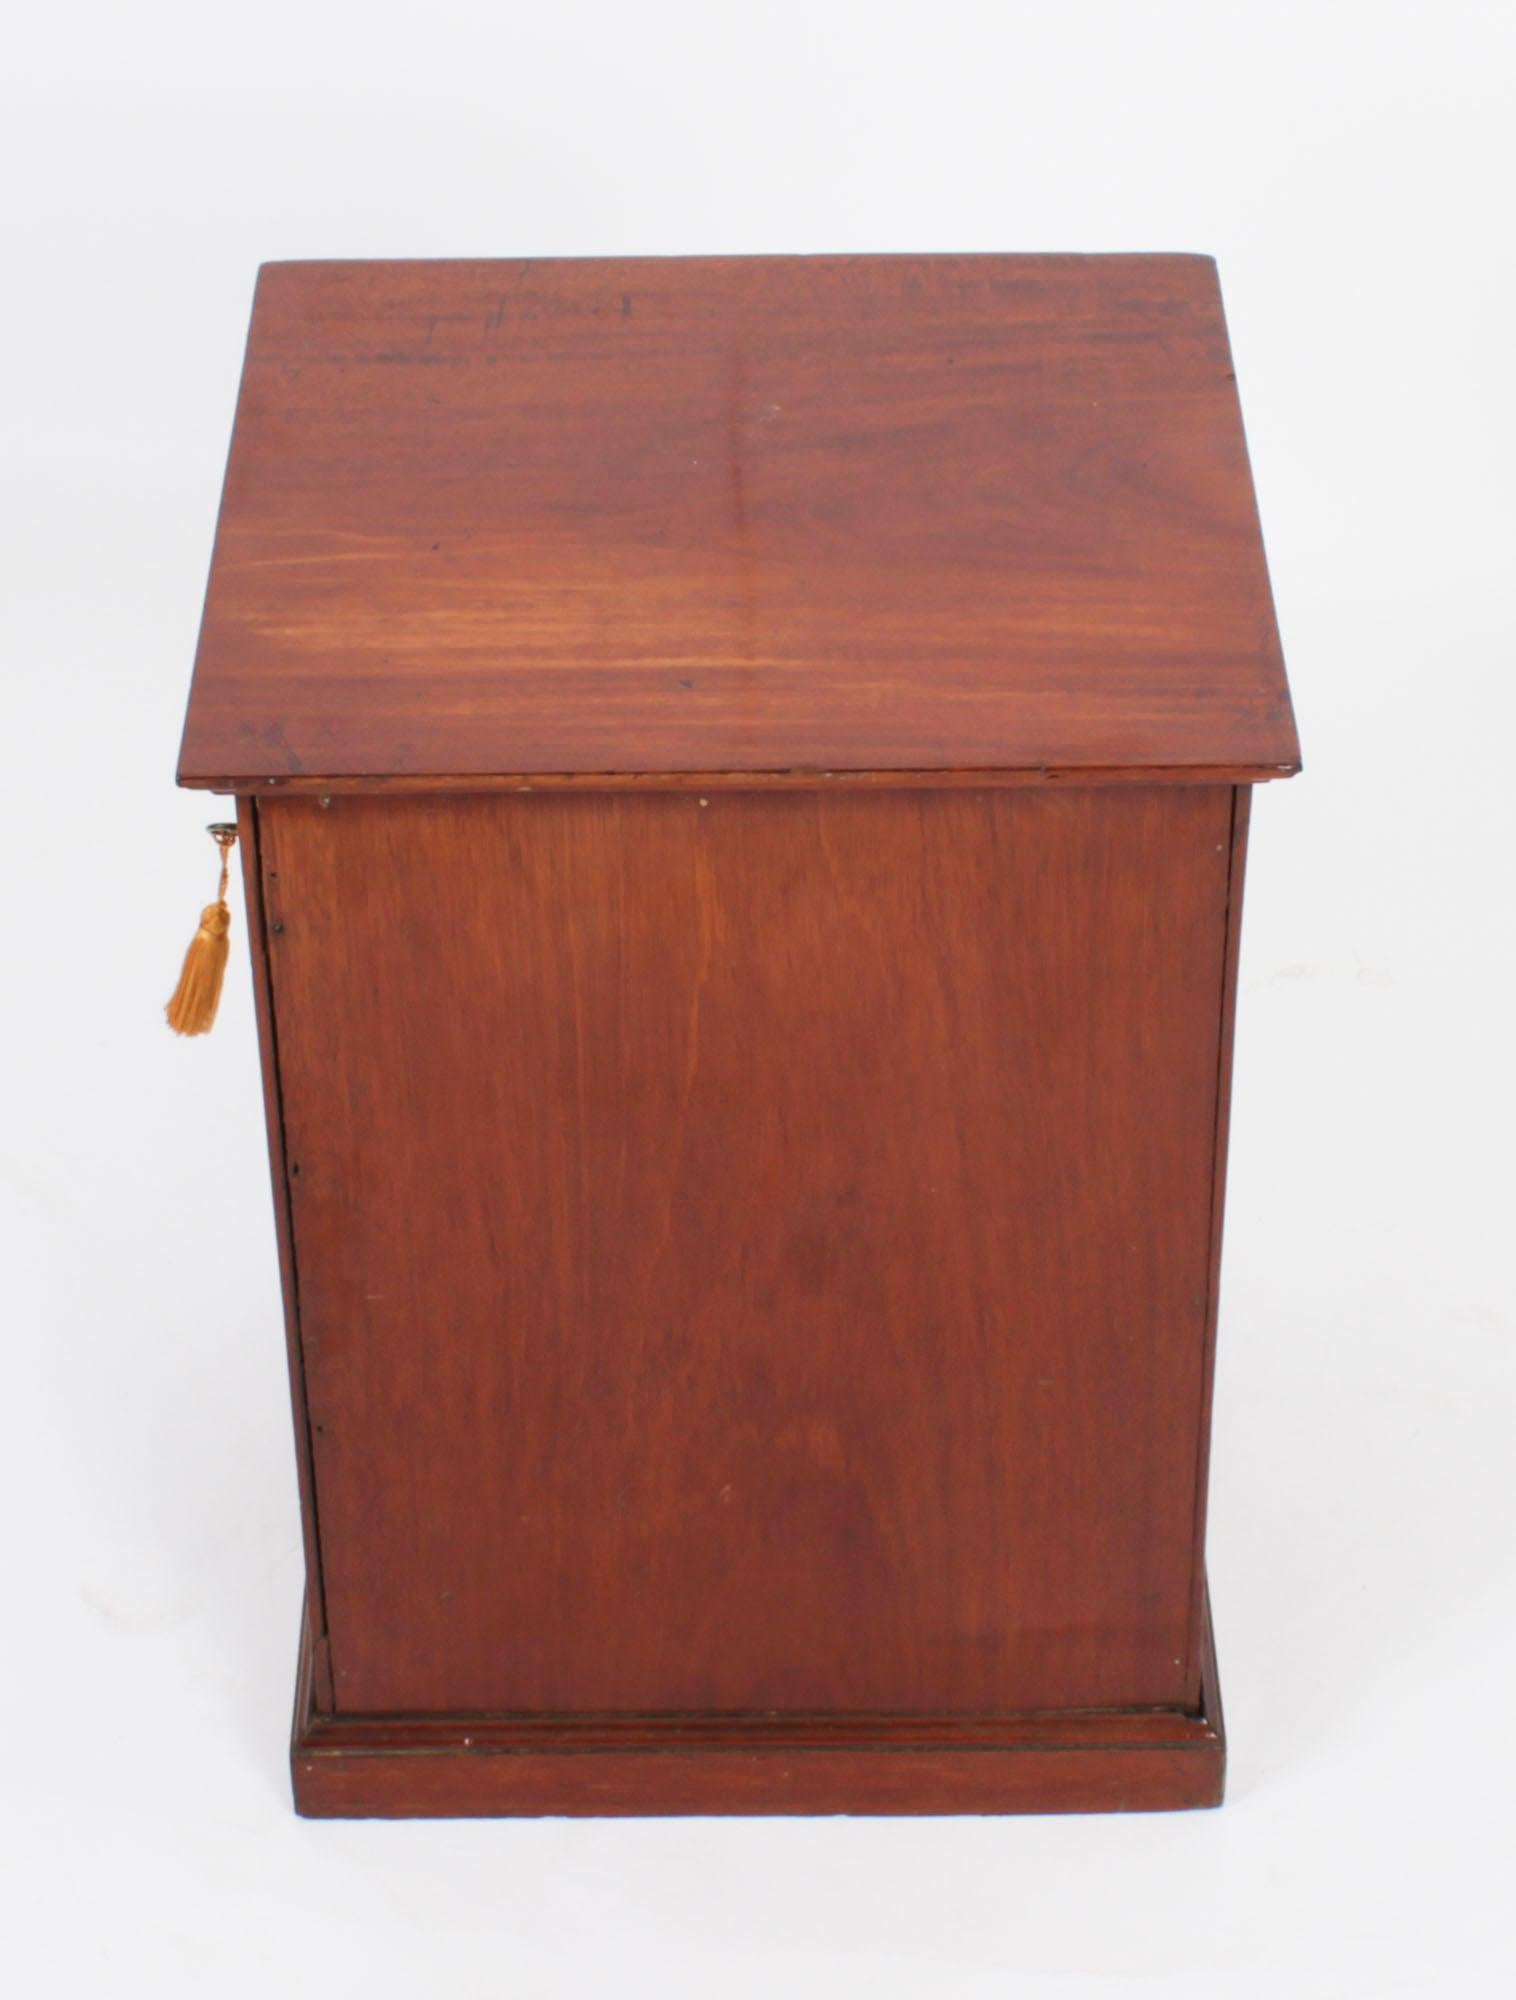 Mahogany Antique Victorian Table Top Jewellery Collectors Cabinet 19th C For Sale